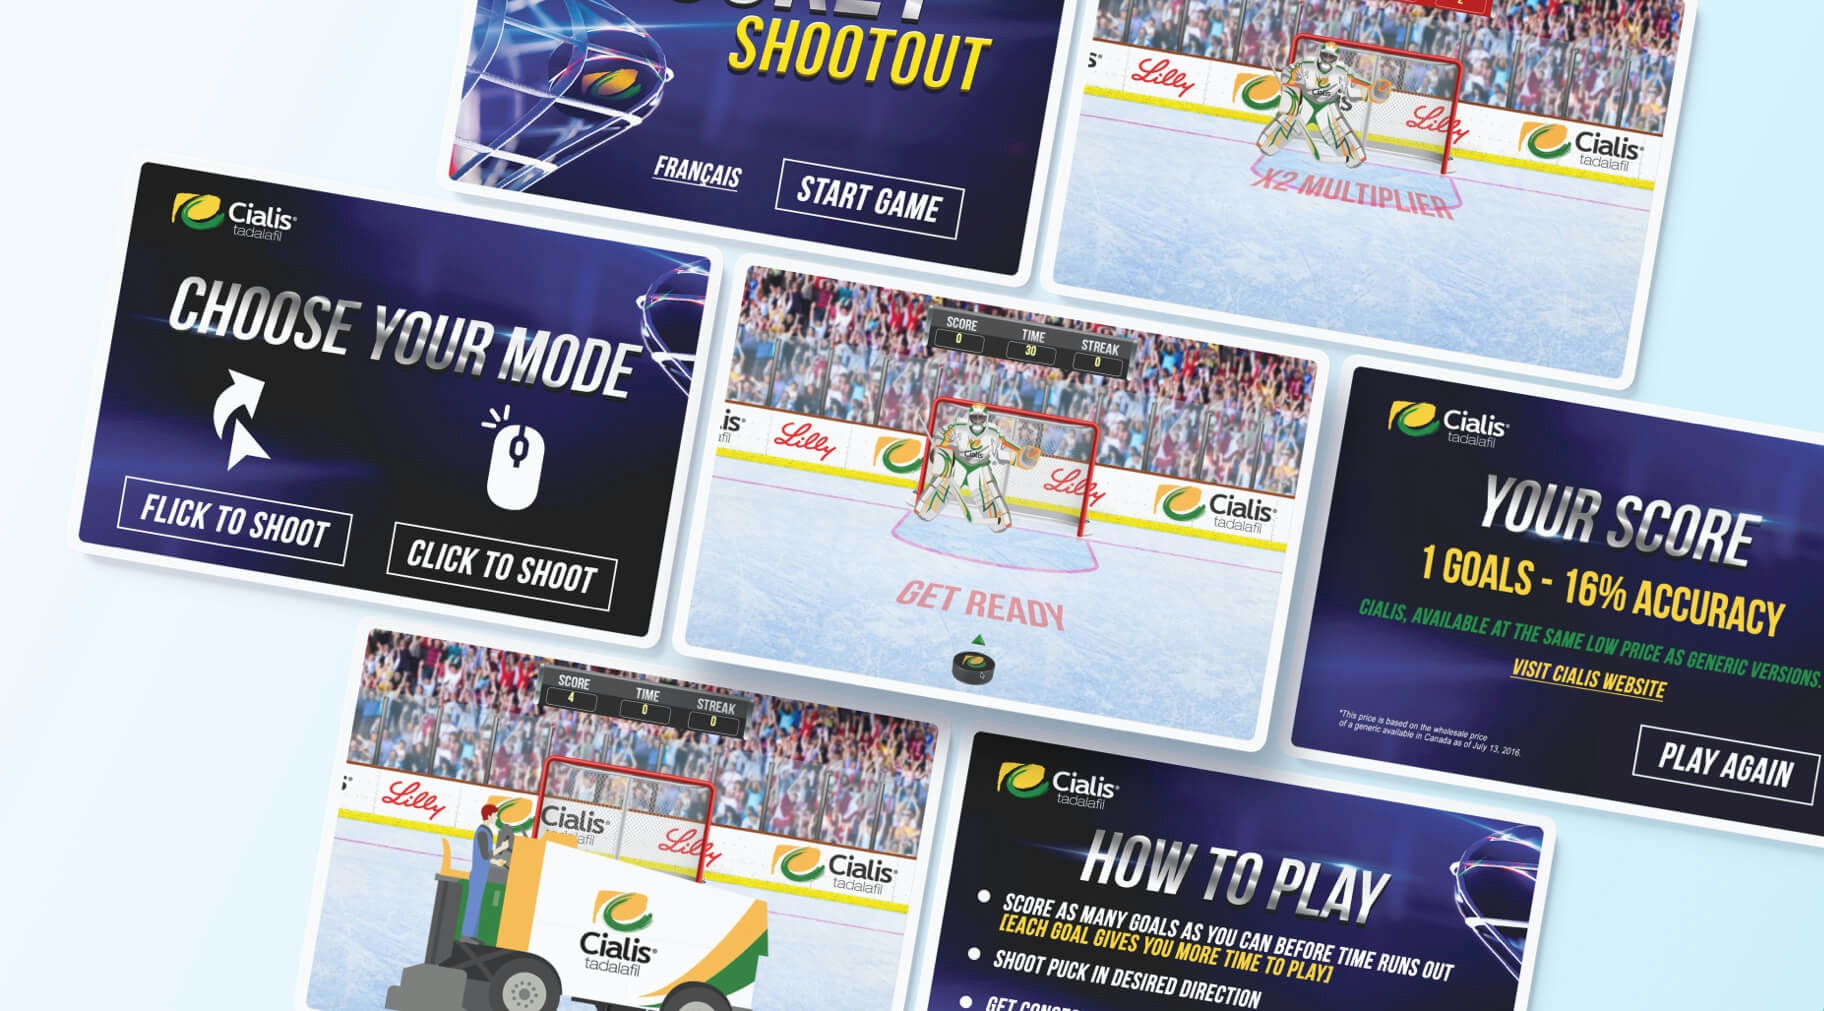 Webpages of hockey shootout game that Elite Digital developed for Cialis.